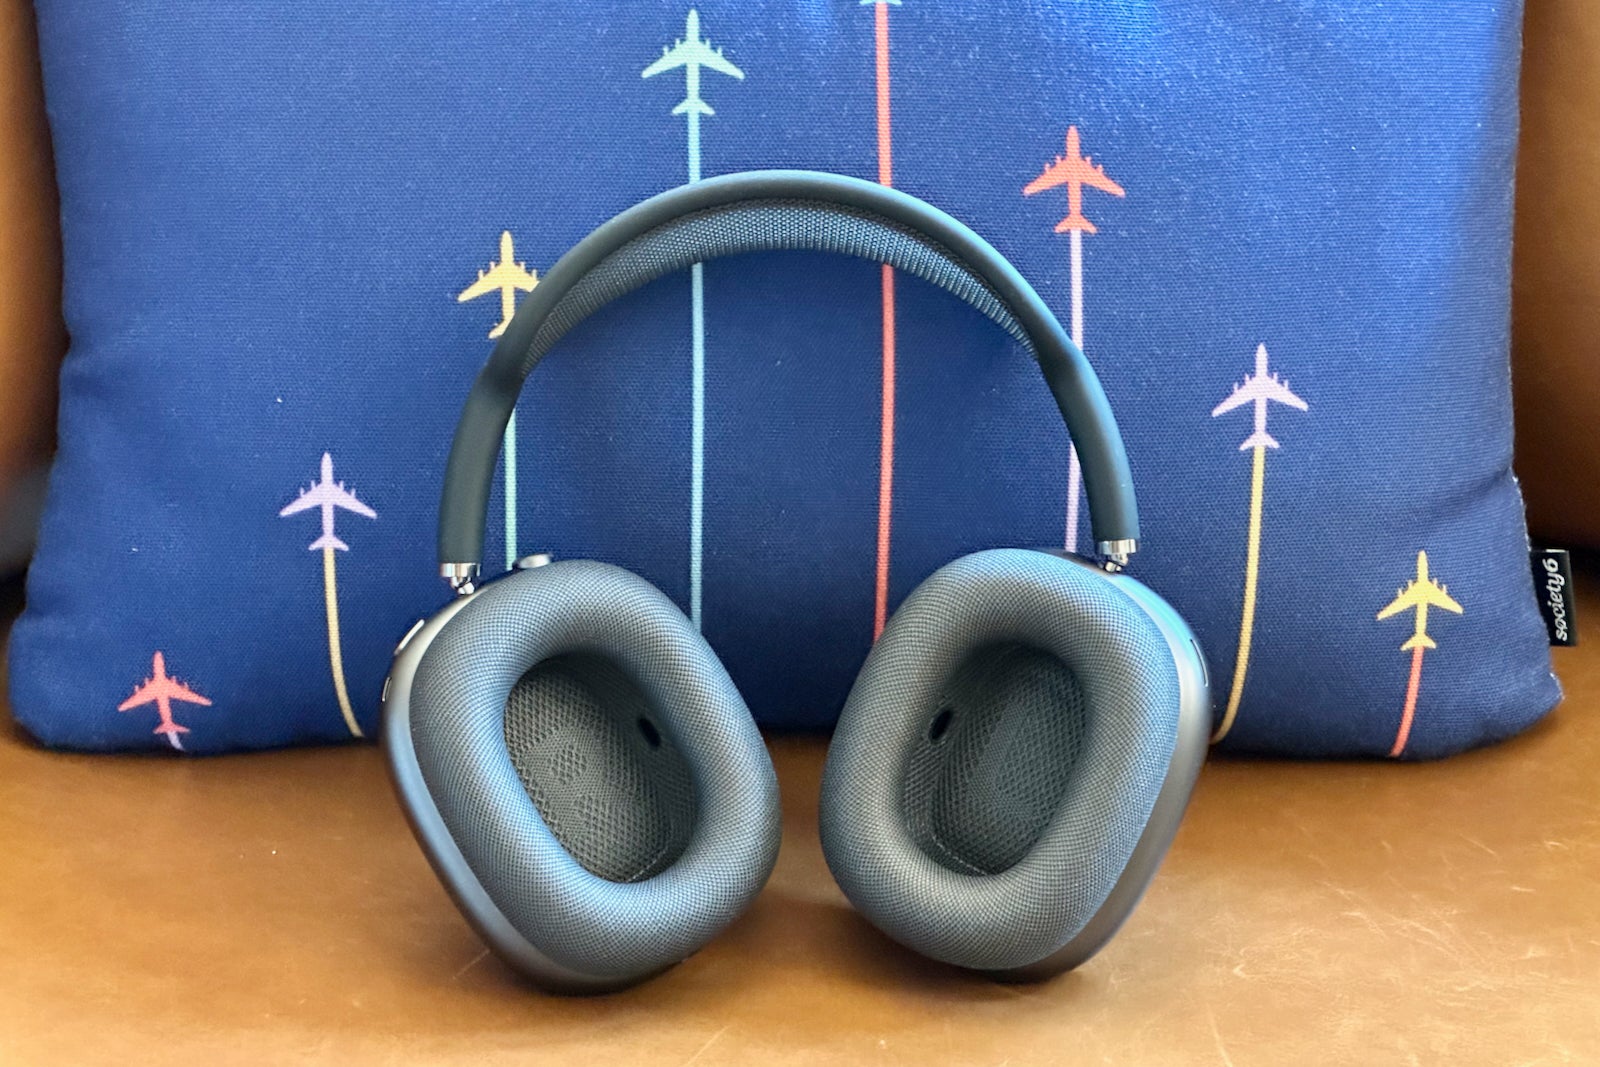 We tested the 6 best noise-canceling headphones for travel - The